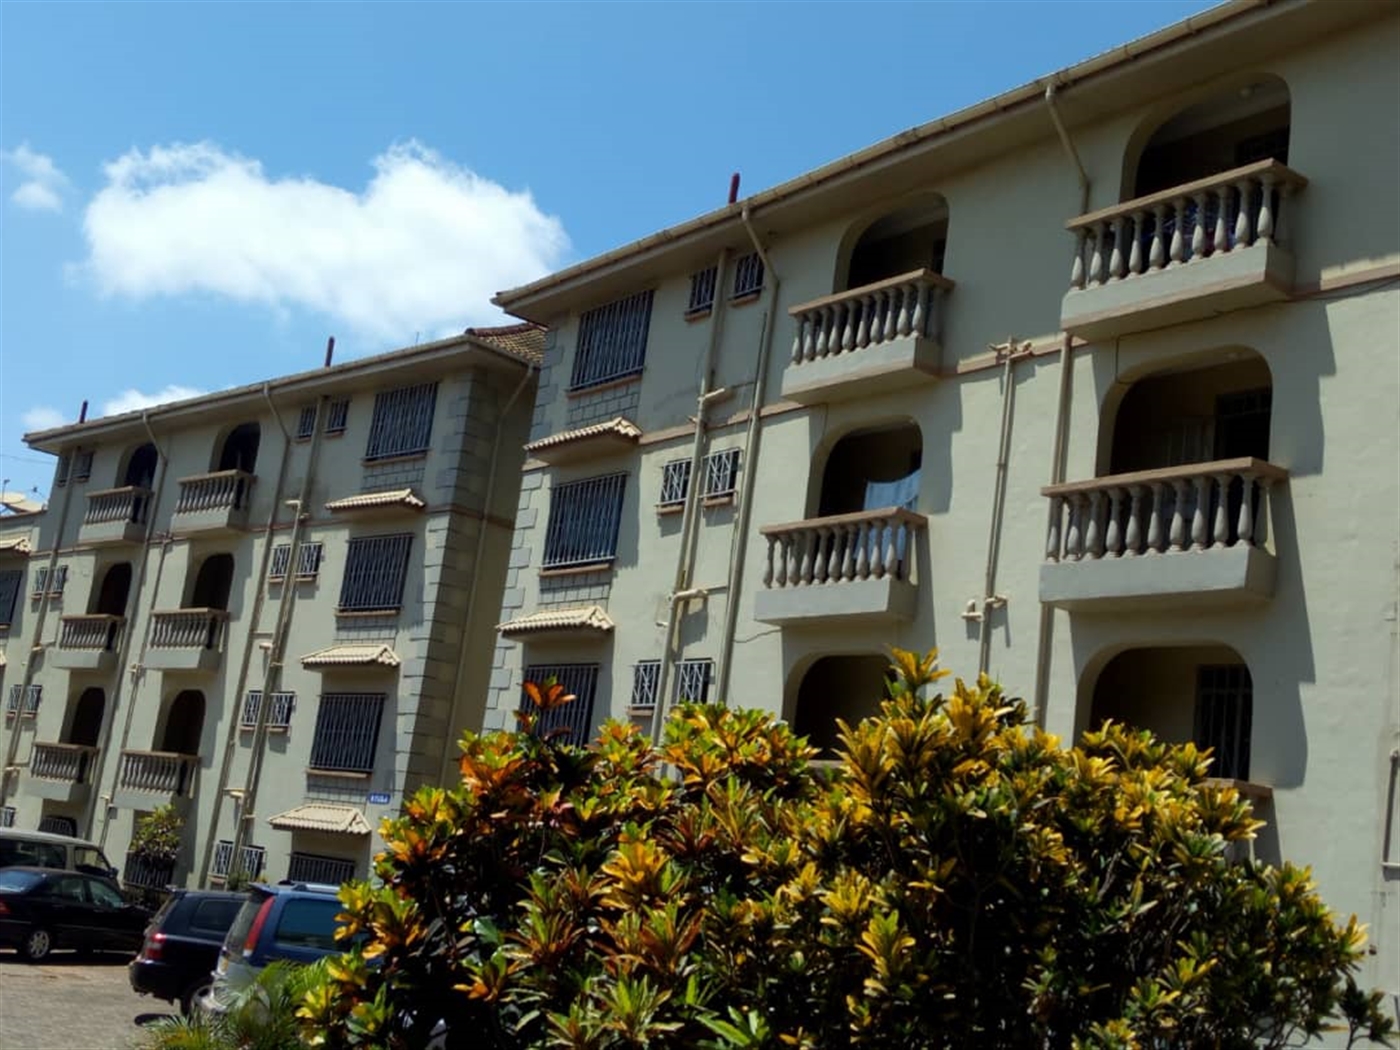 Apartment for rent in Lugogo Kampala